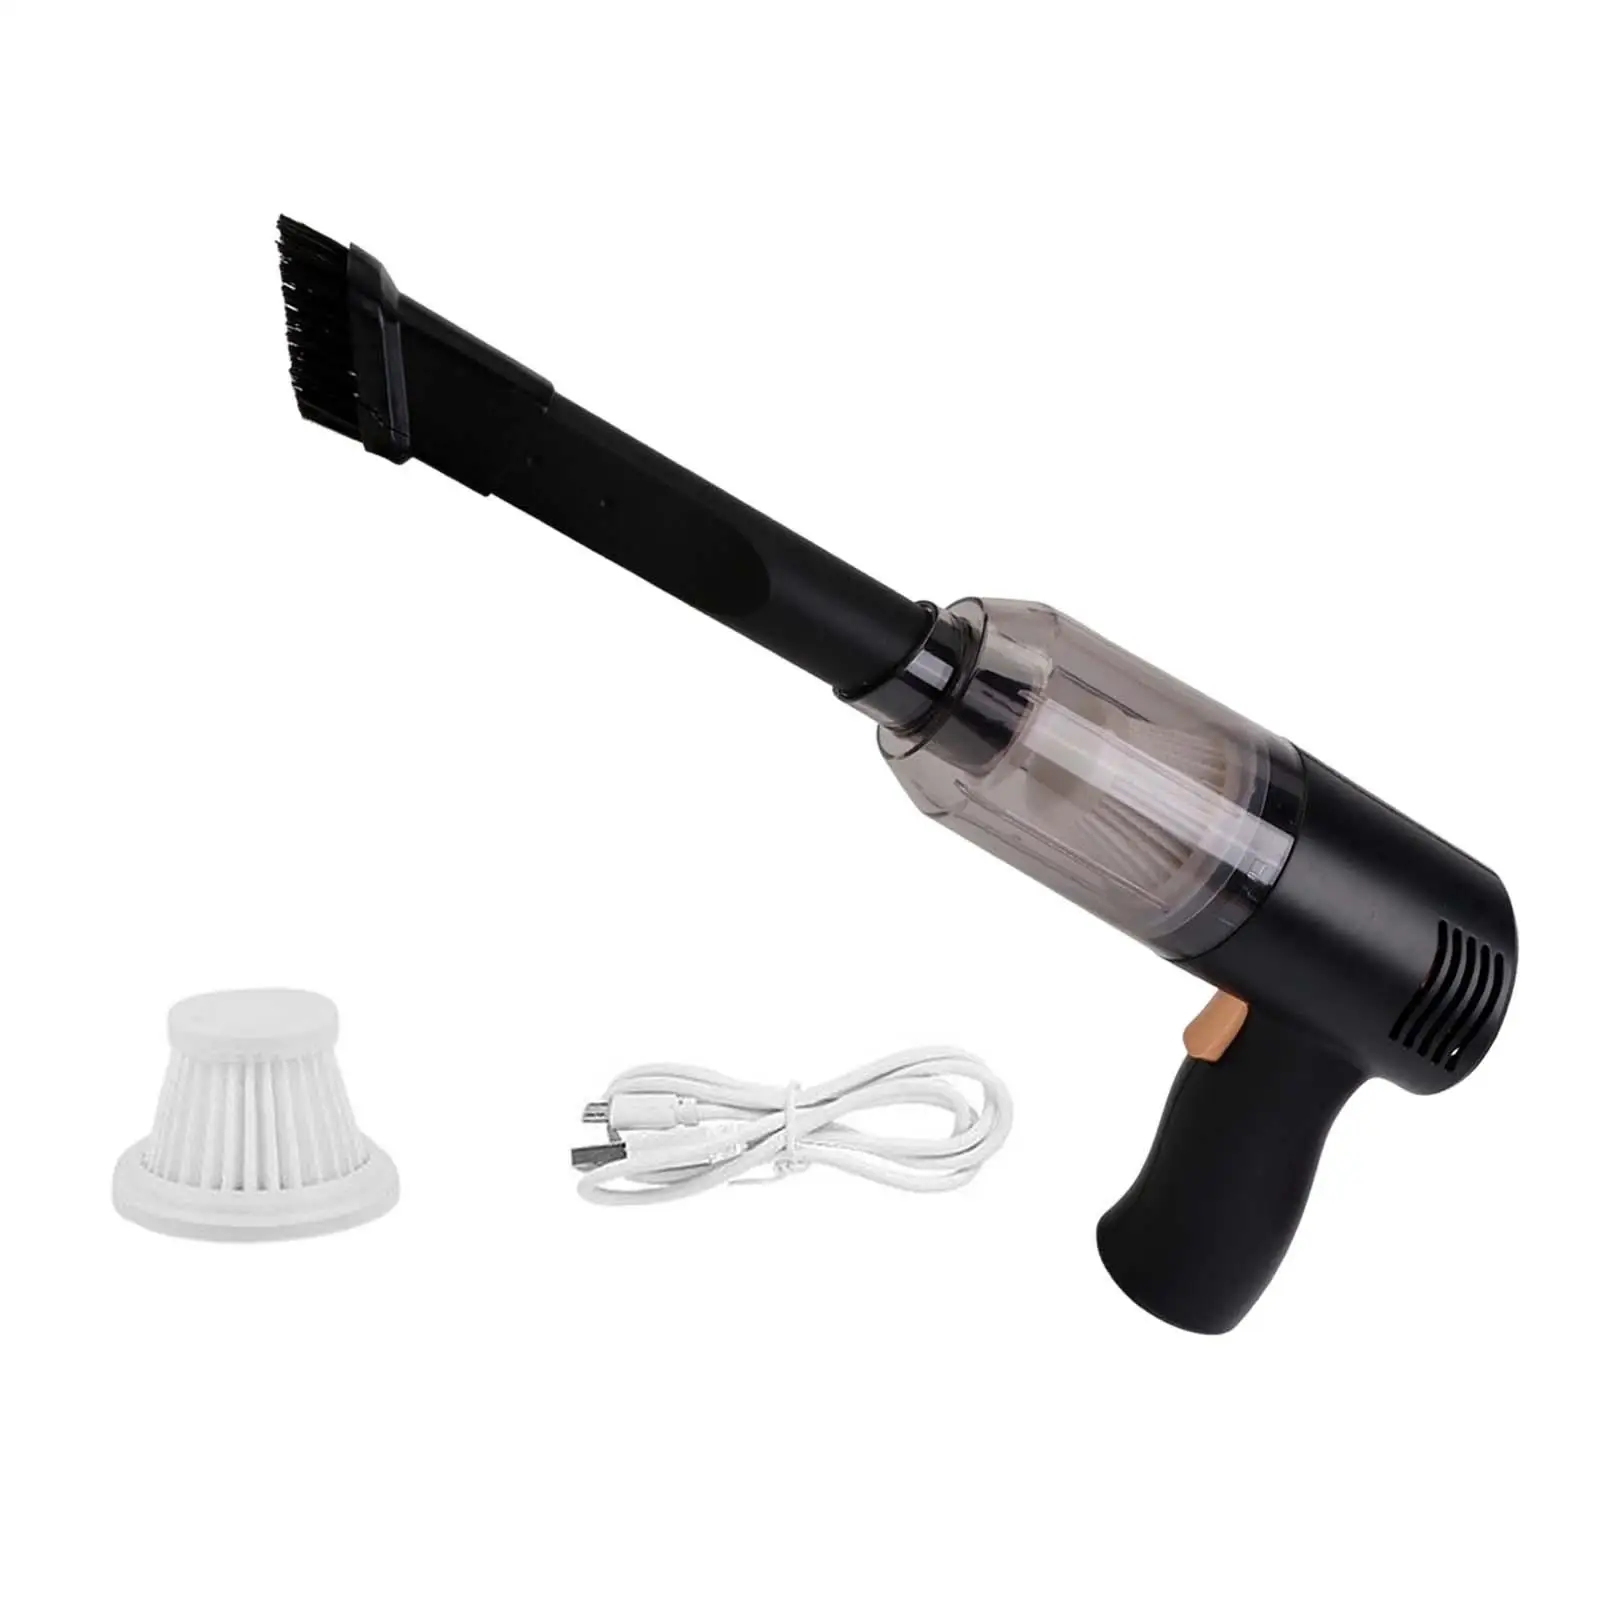 Handheld Vacuum Cleaner Easy to Use Lightweight Clear Dust Box Low Noise Cordless Car Vacuum Cleaner for Office Pet Hair Desk